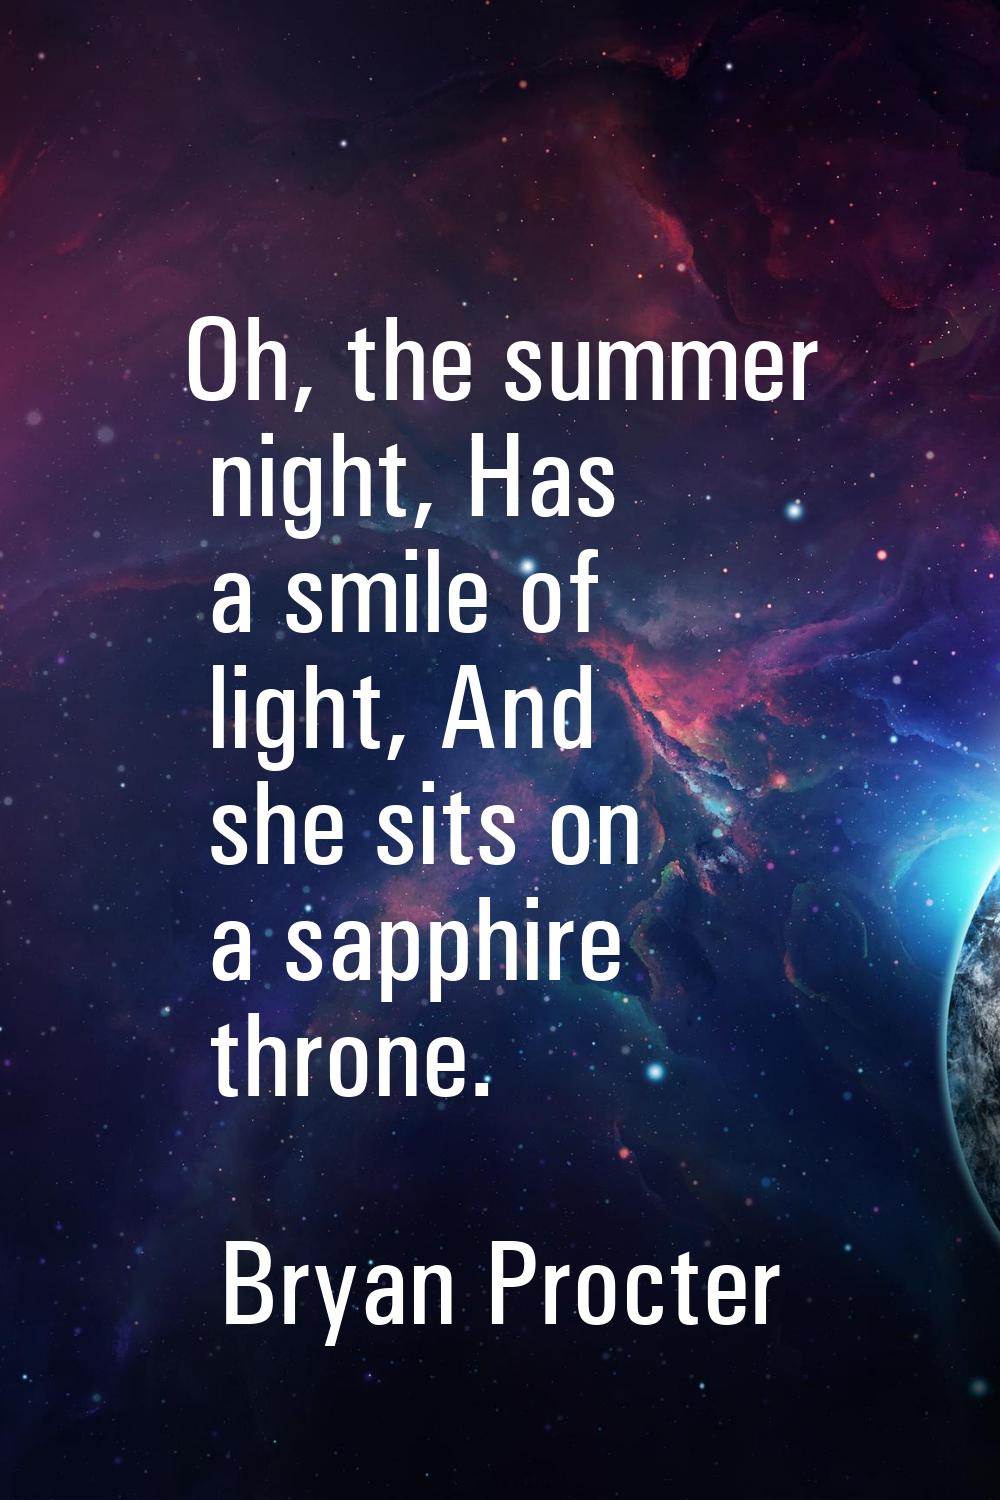 Oh, the summer night, Has a smile of light, And she sits on a sapphire throne.